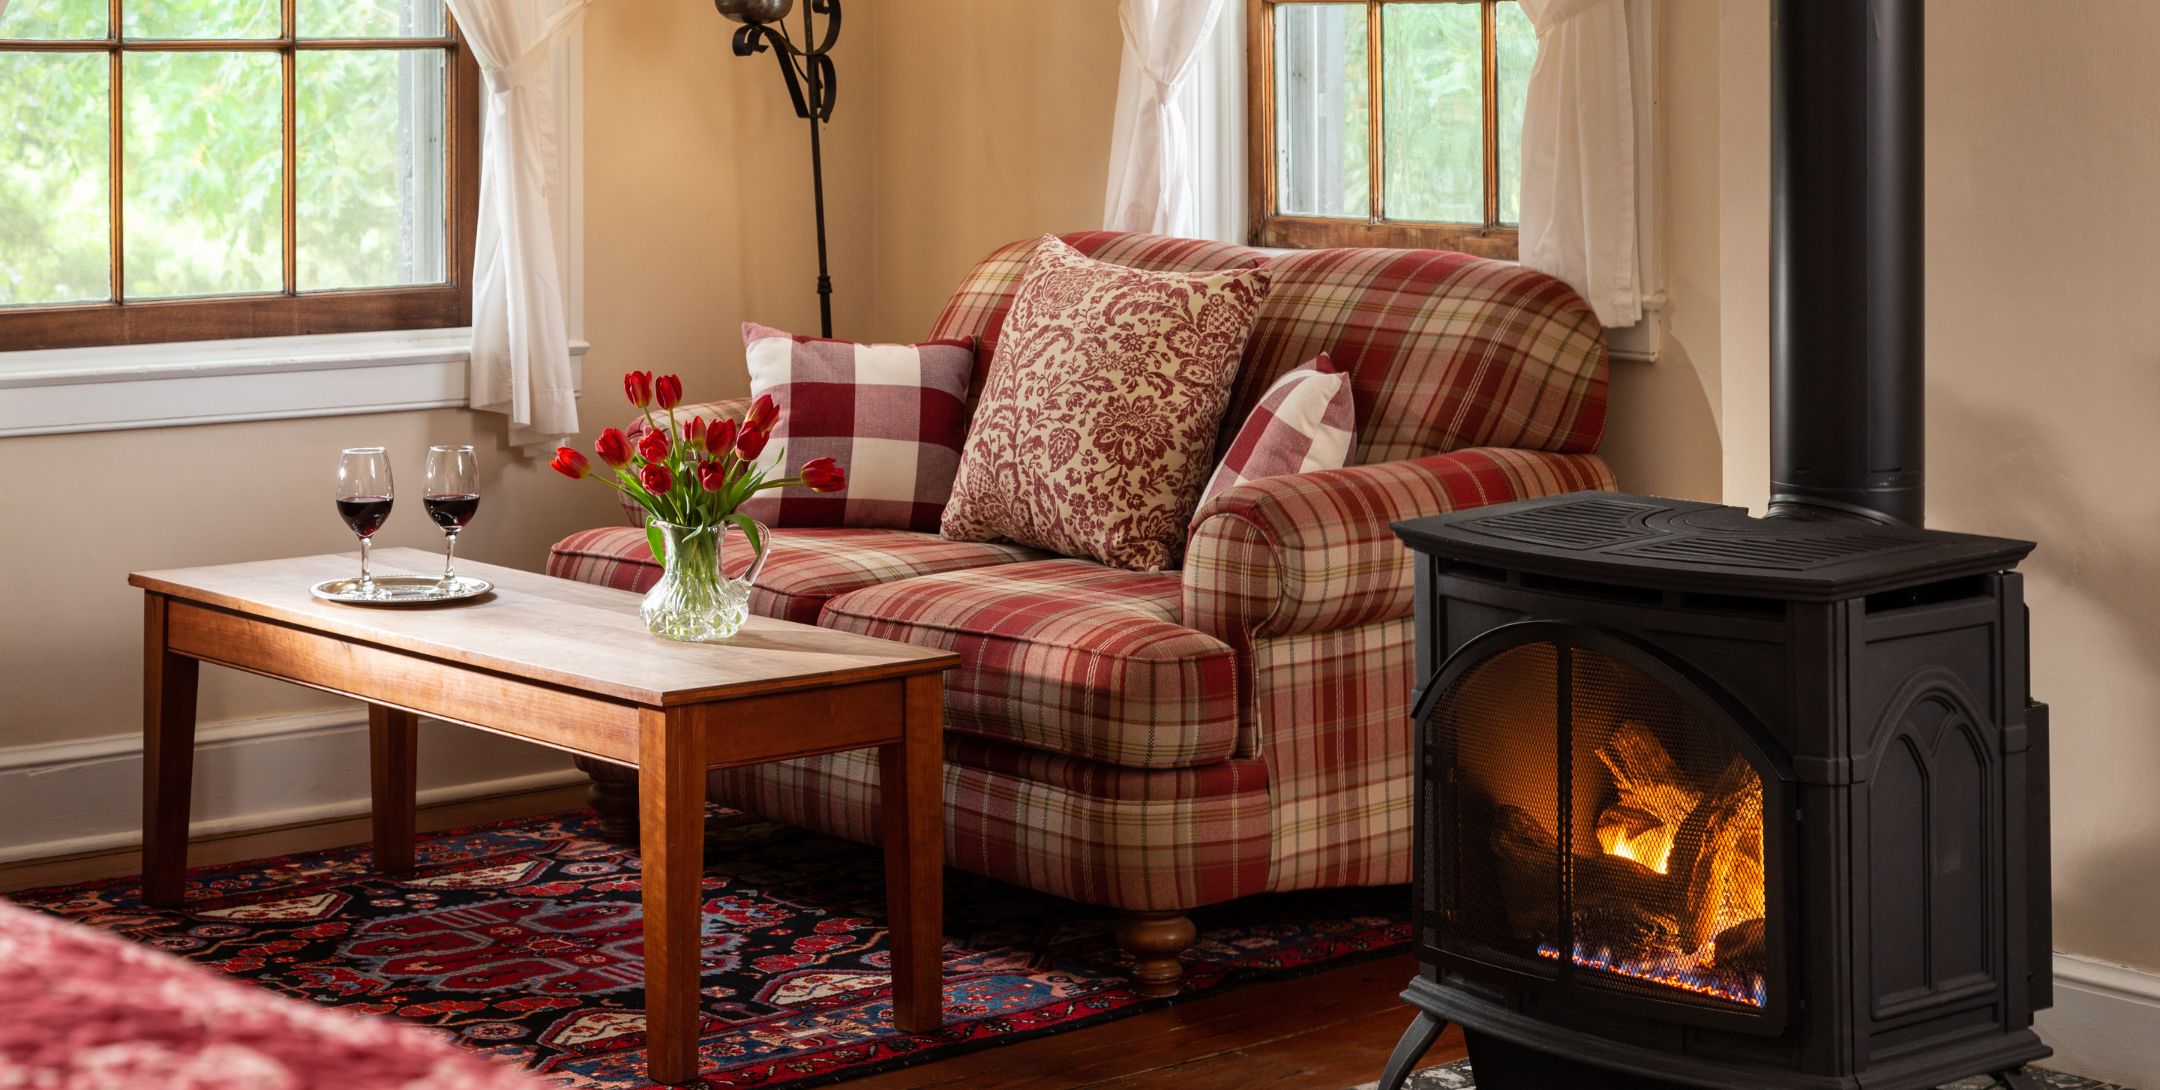 Red plaid loveseat in the corner flanked by two windows, with a coffee table topped with fresh flowers and two glasses of wine.